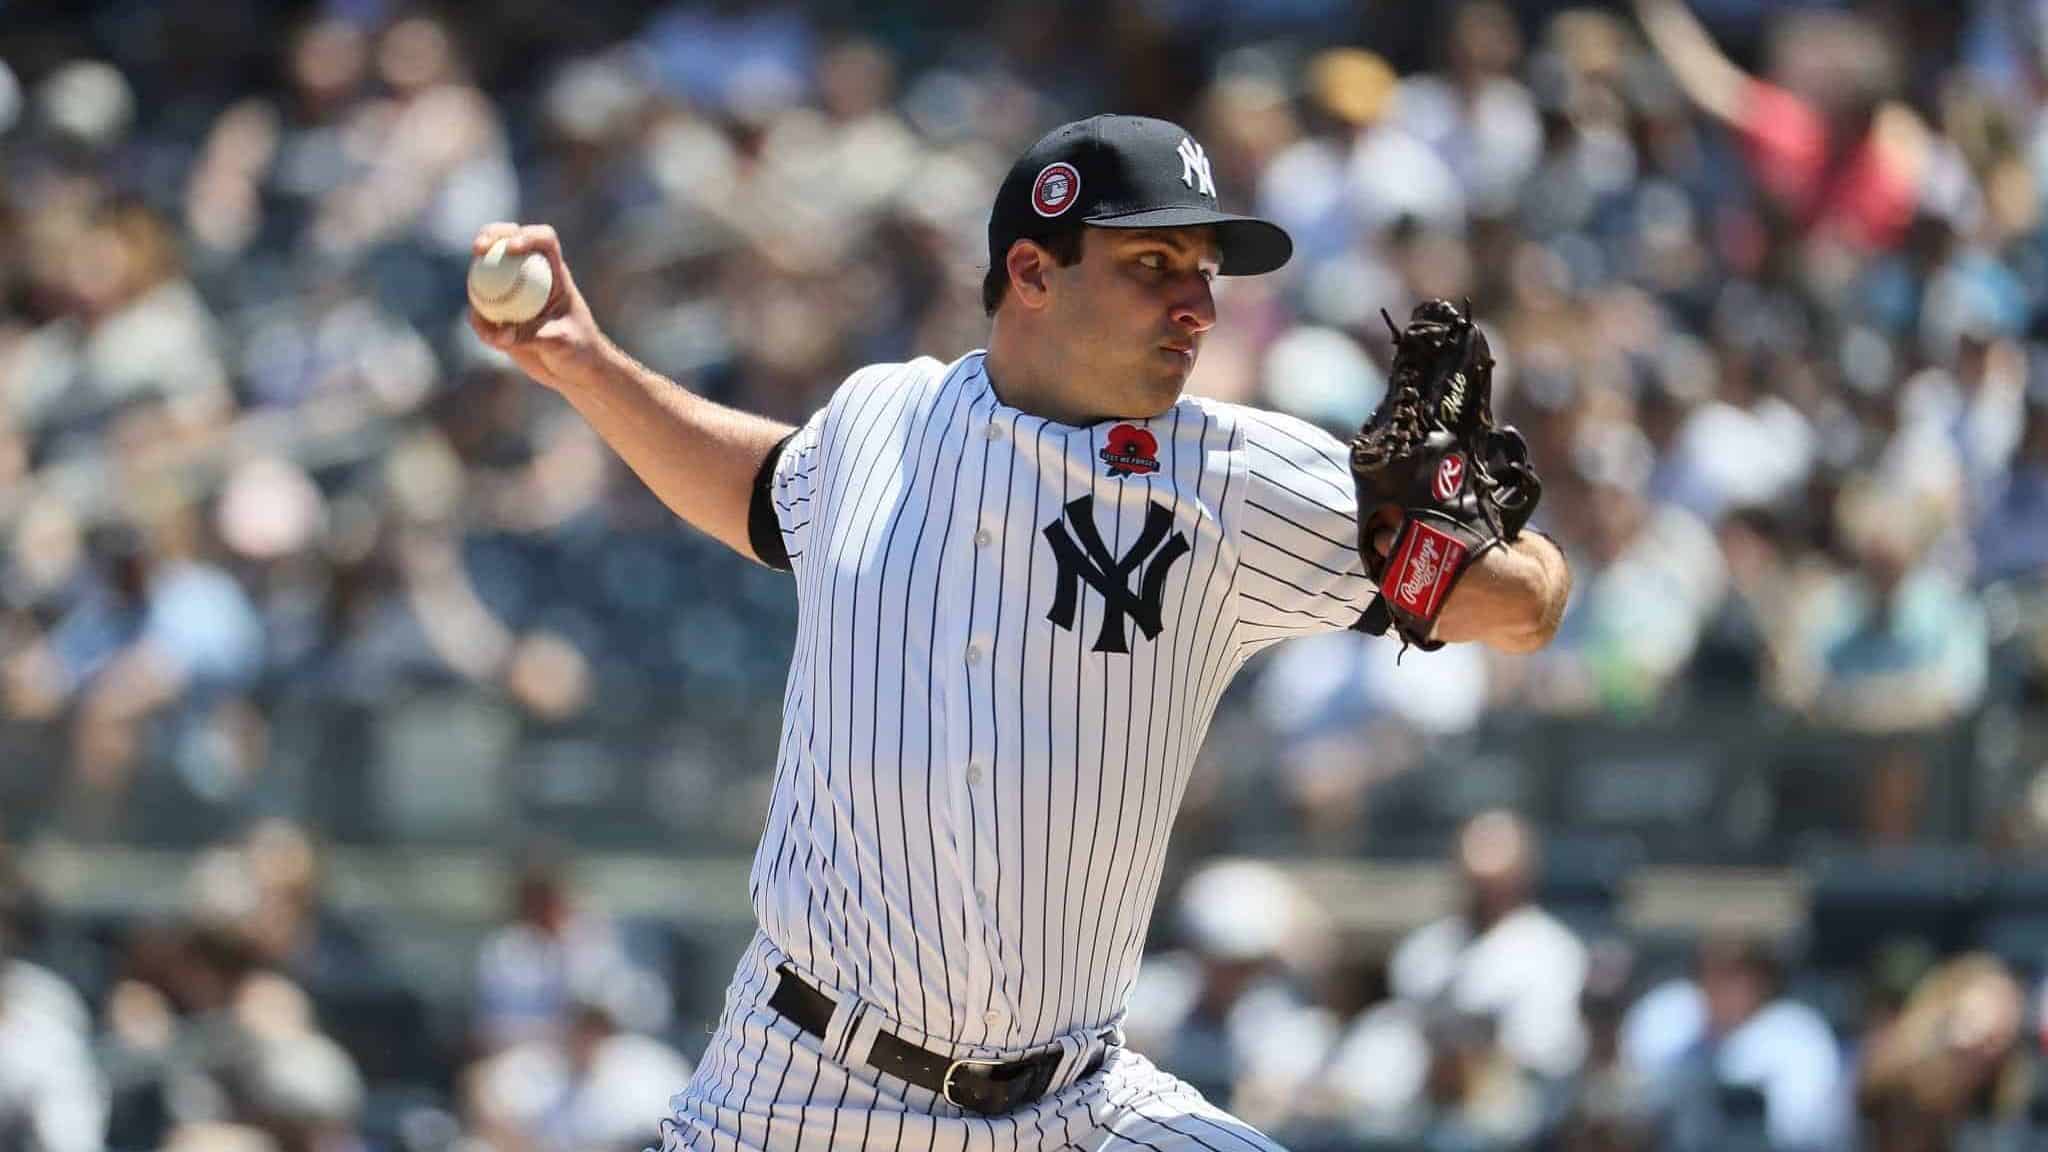 NEW YORK, NEW YORK - MAY 27: David Hale #75 of the New York Yankees pitches against the San Diego Padres during their game at Yankee Stadium on May 27, 2019 in New York City.